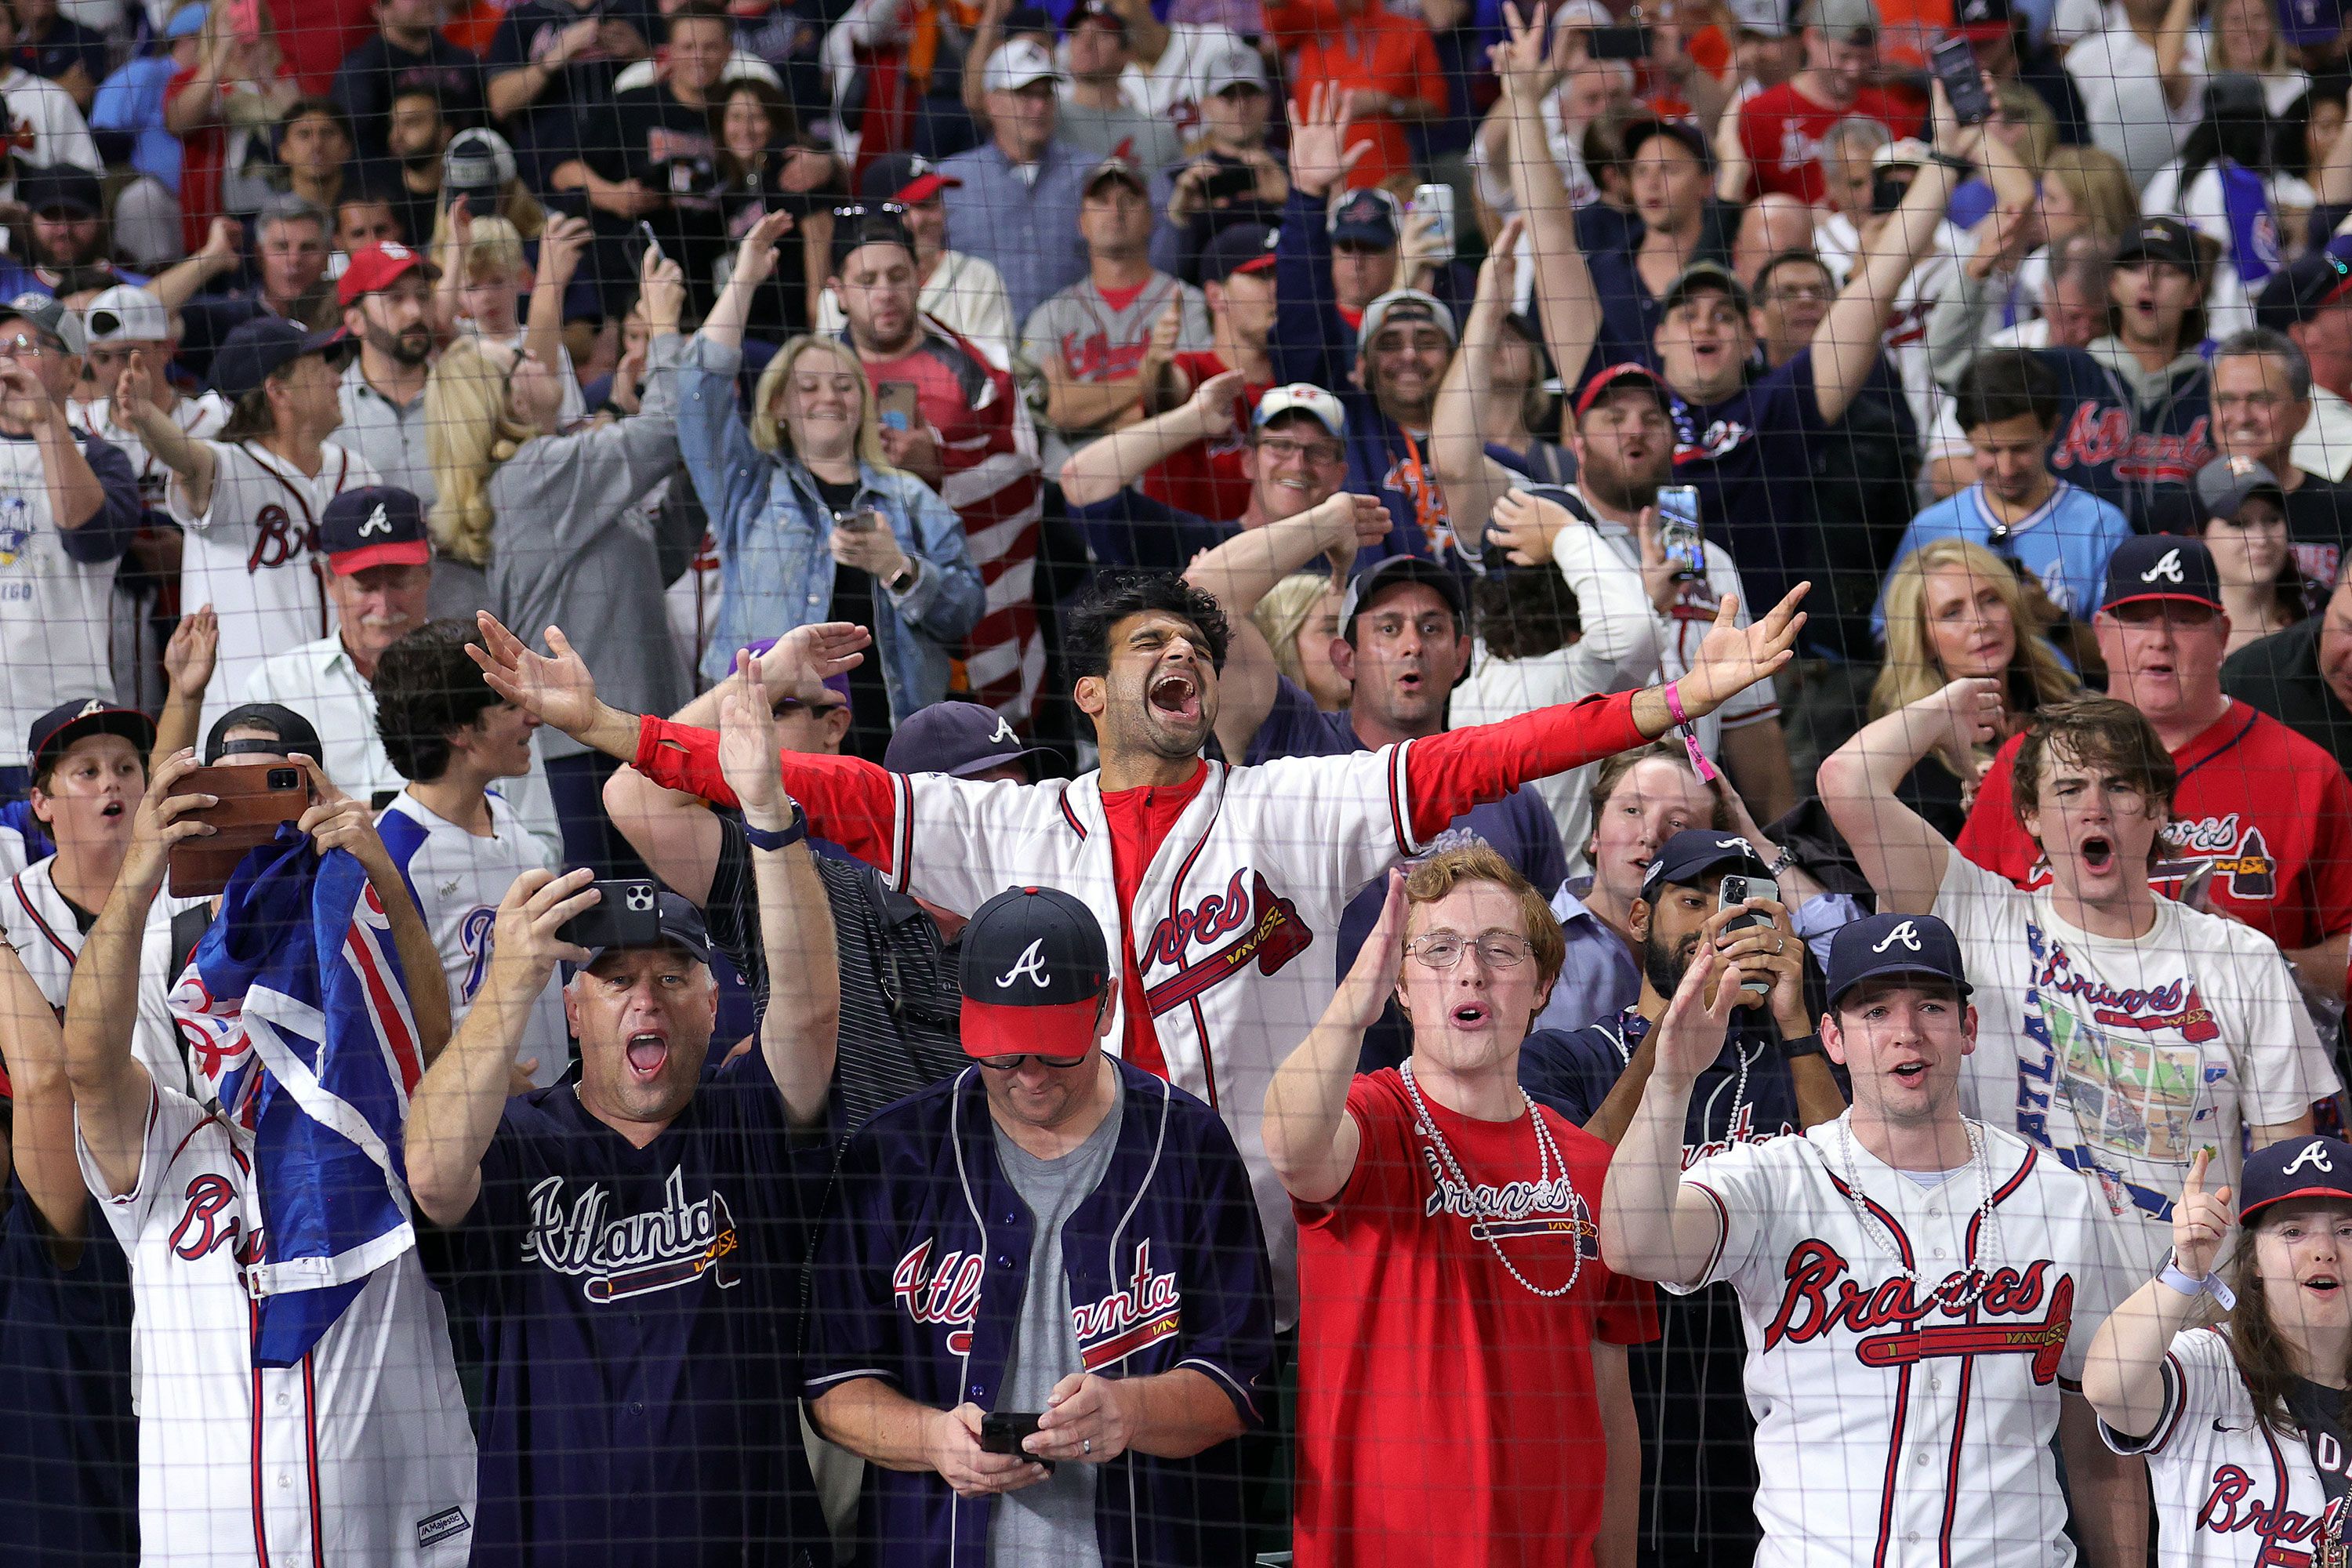 the braves fans